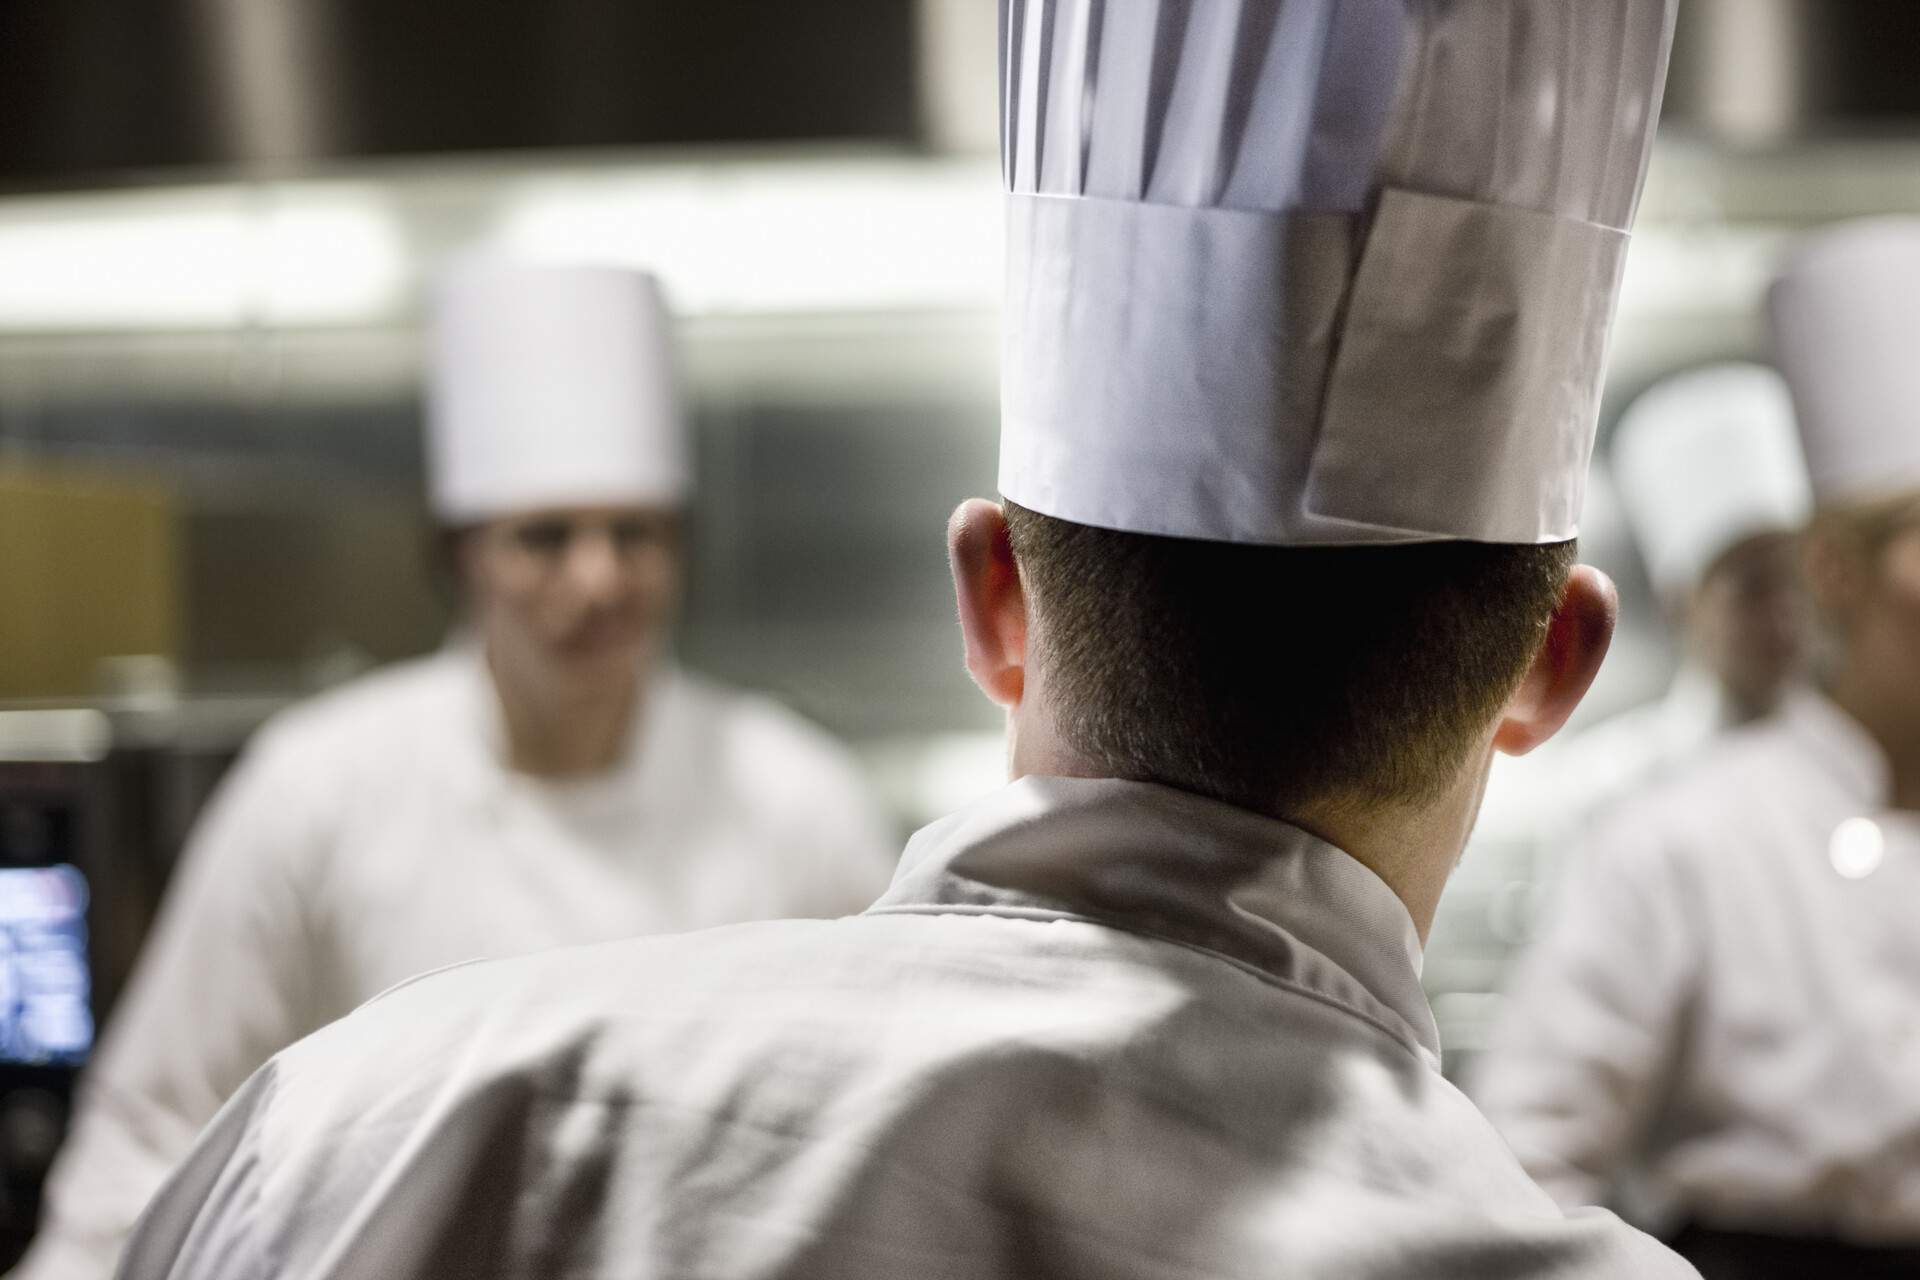 Group of chefs wearing toque hats inside a kitchen.